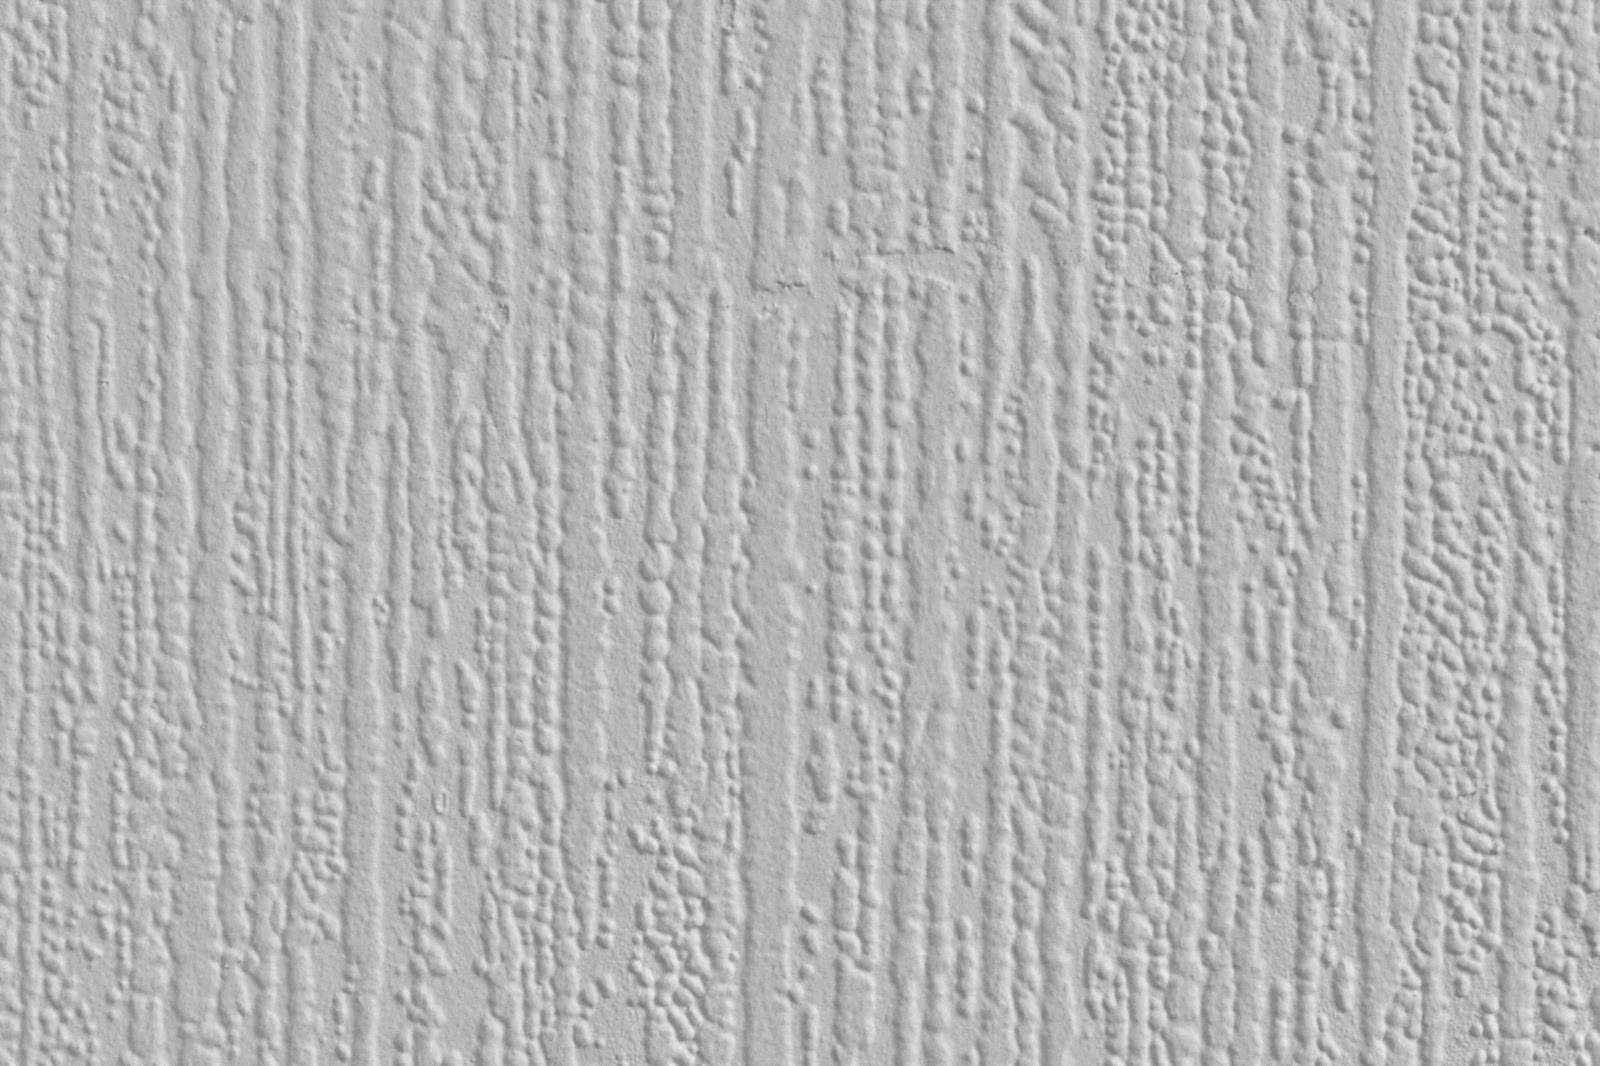 White stucco plaster wall paper texture up close